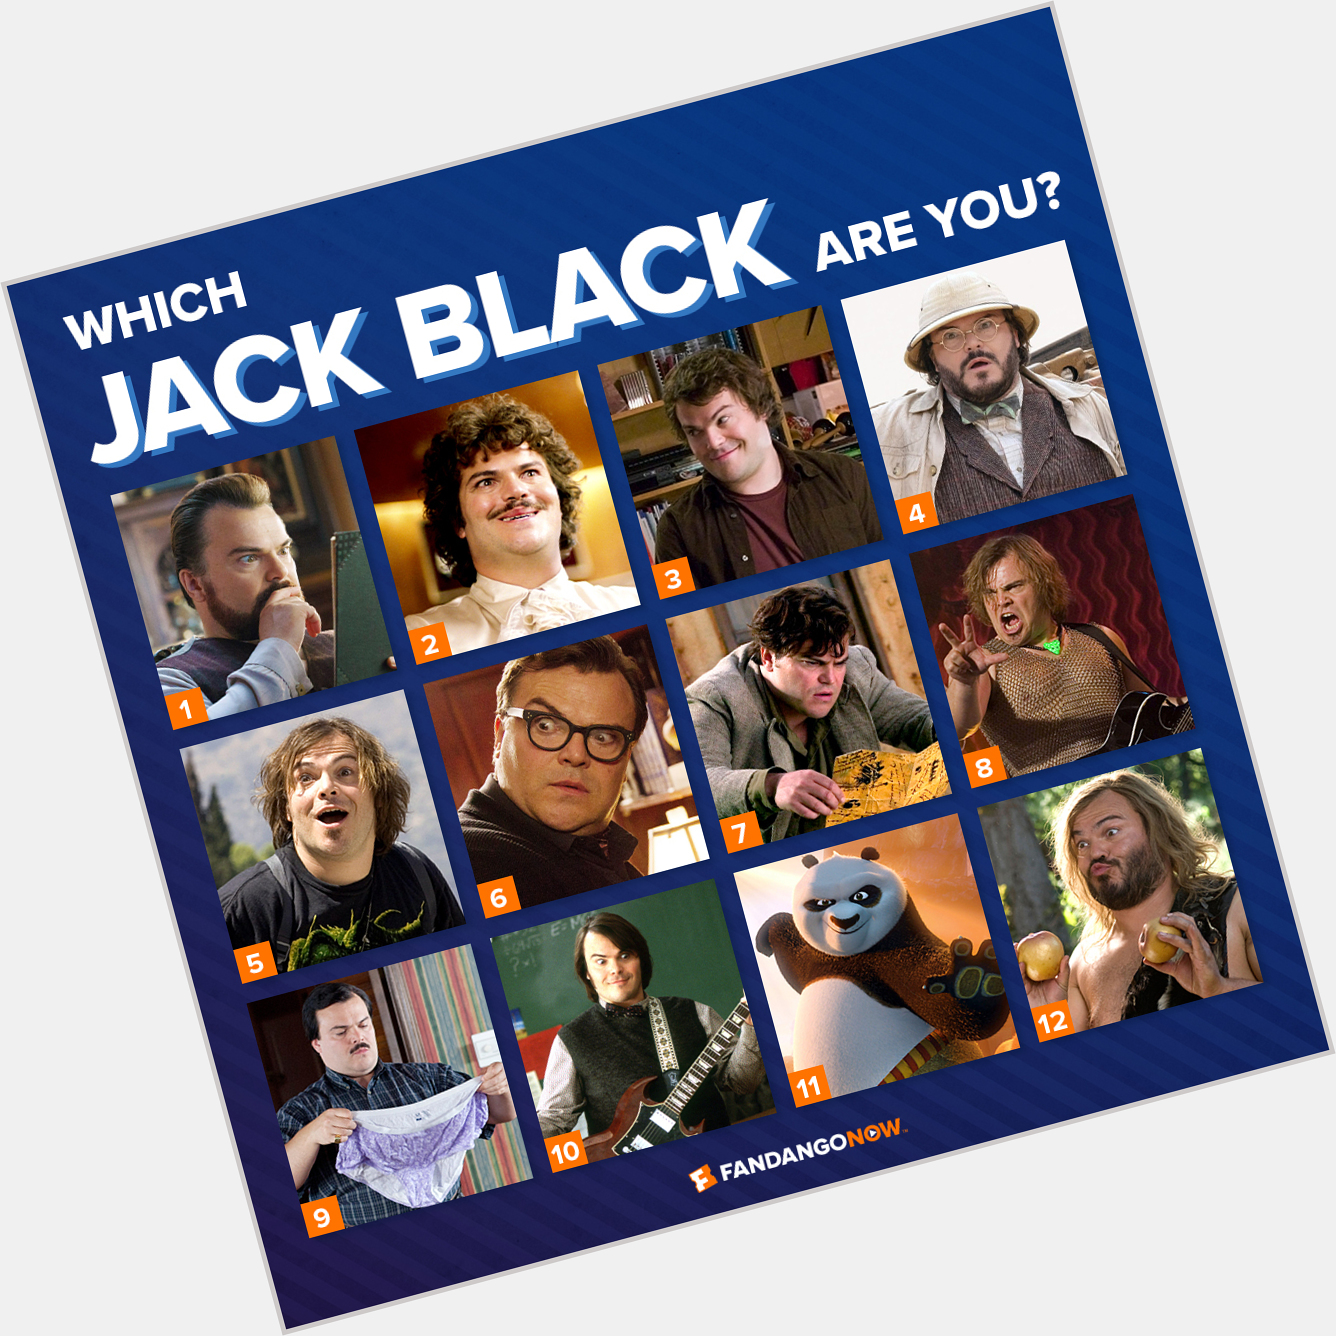 Happy birthday to one of our greatest comedic actors, Jack Black! 